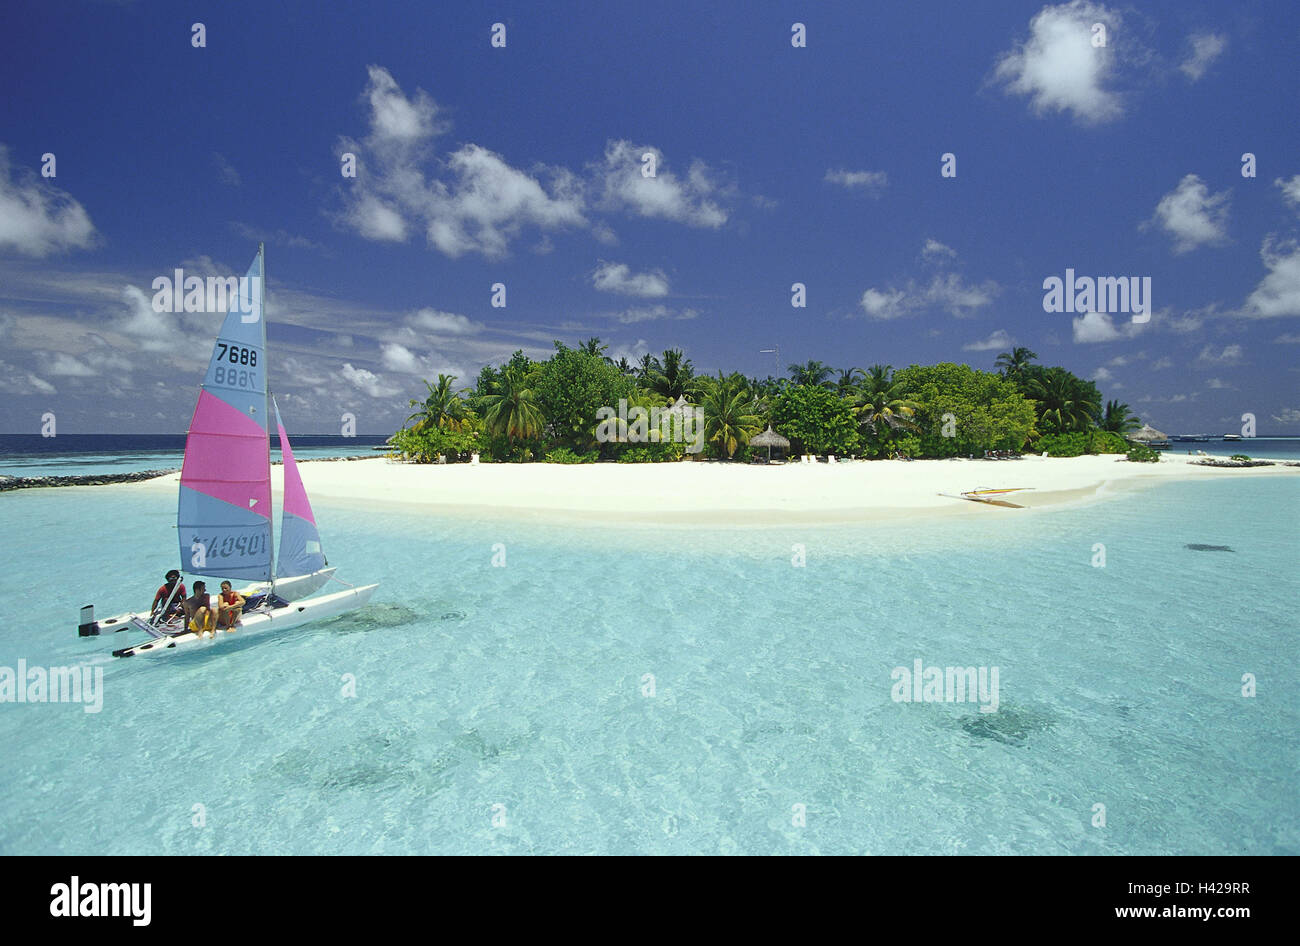 The Maldives, Nakatchafushi, palm island, catamaran, sandy beach, island, palms, palm beach, sea, water, destination, rest, leisure time, foreign travels, exoticism vacation, sunny, summer, outside, ocean, holiday paradise, Idyll, dream vacation, to dream travel, sail, boat, person, tourist, no model release, tourism, Stock Photo